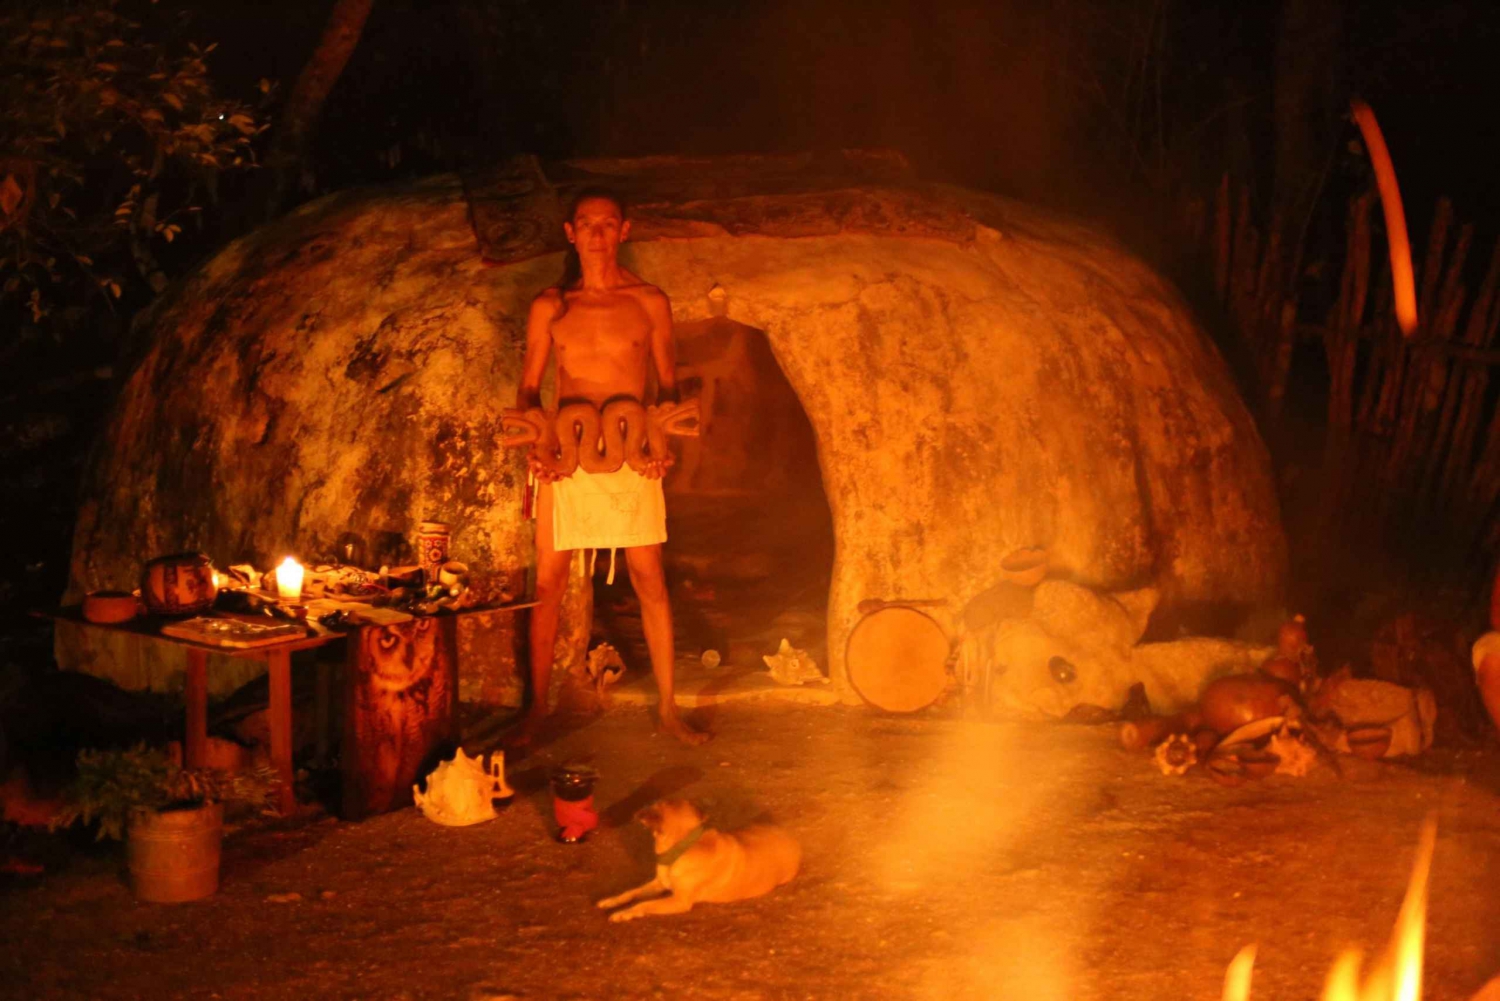 From Riviera Maya: Private Temazcal & Cenote Ceremony